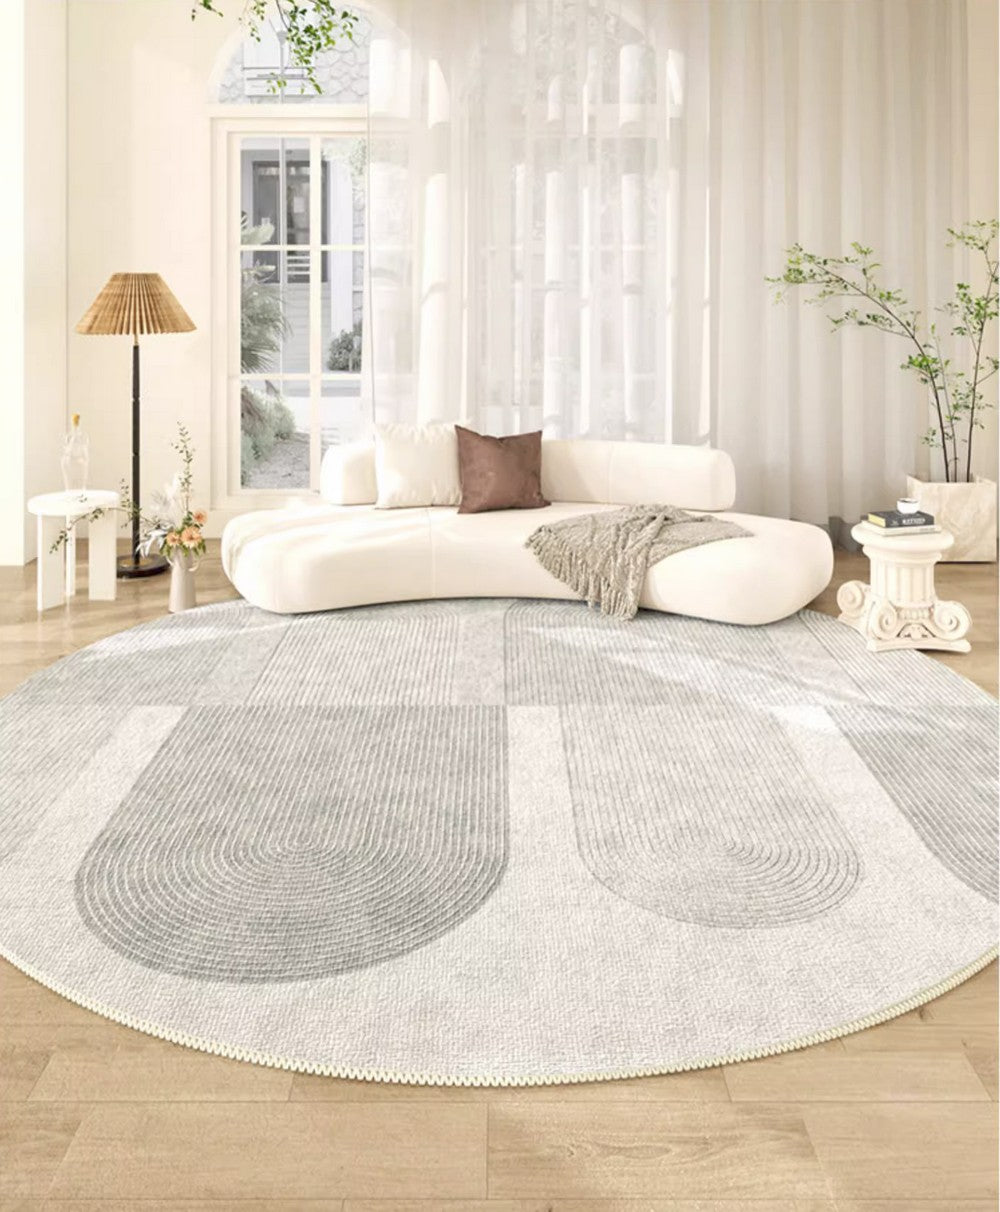 Modern Floor Carpets under Dining Room Table, Large Geometric Modern Rugs in Bedroom, Contemporary Abstract Rugs for Living Room